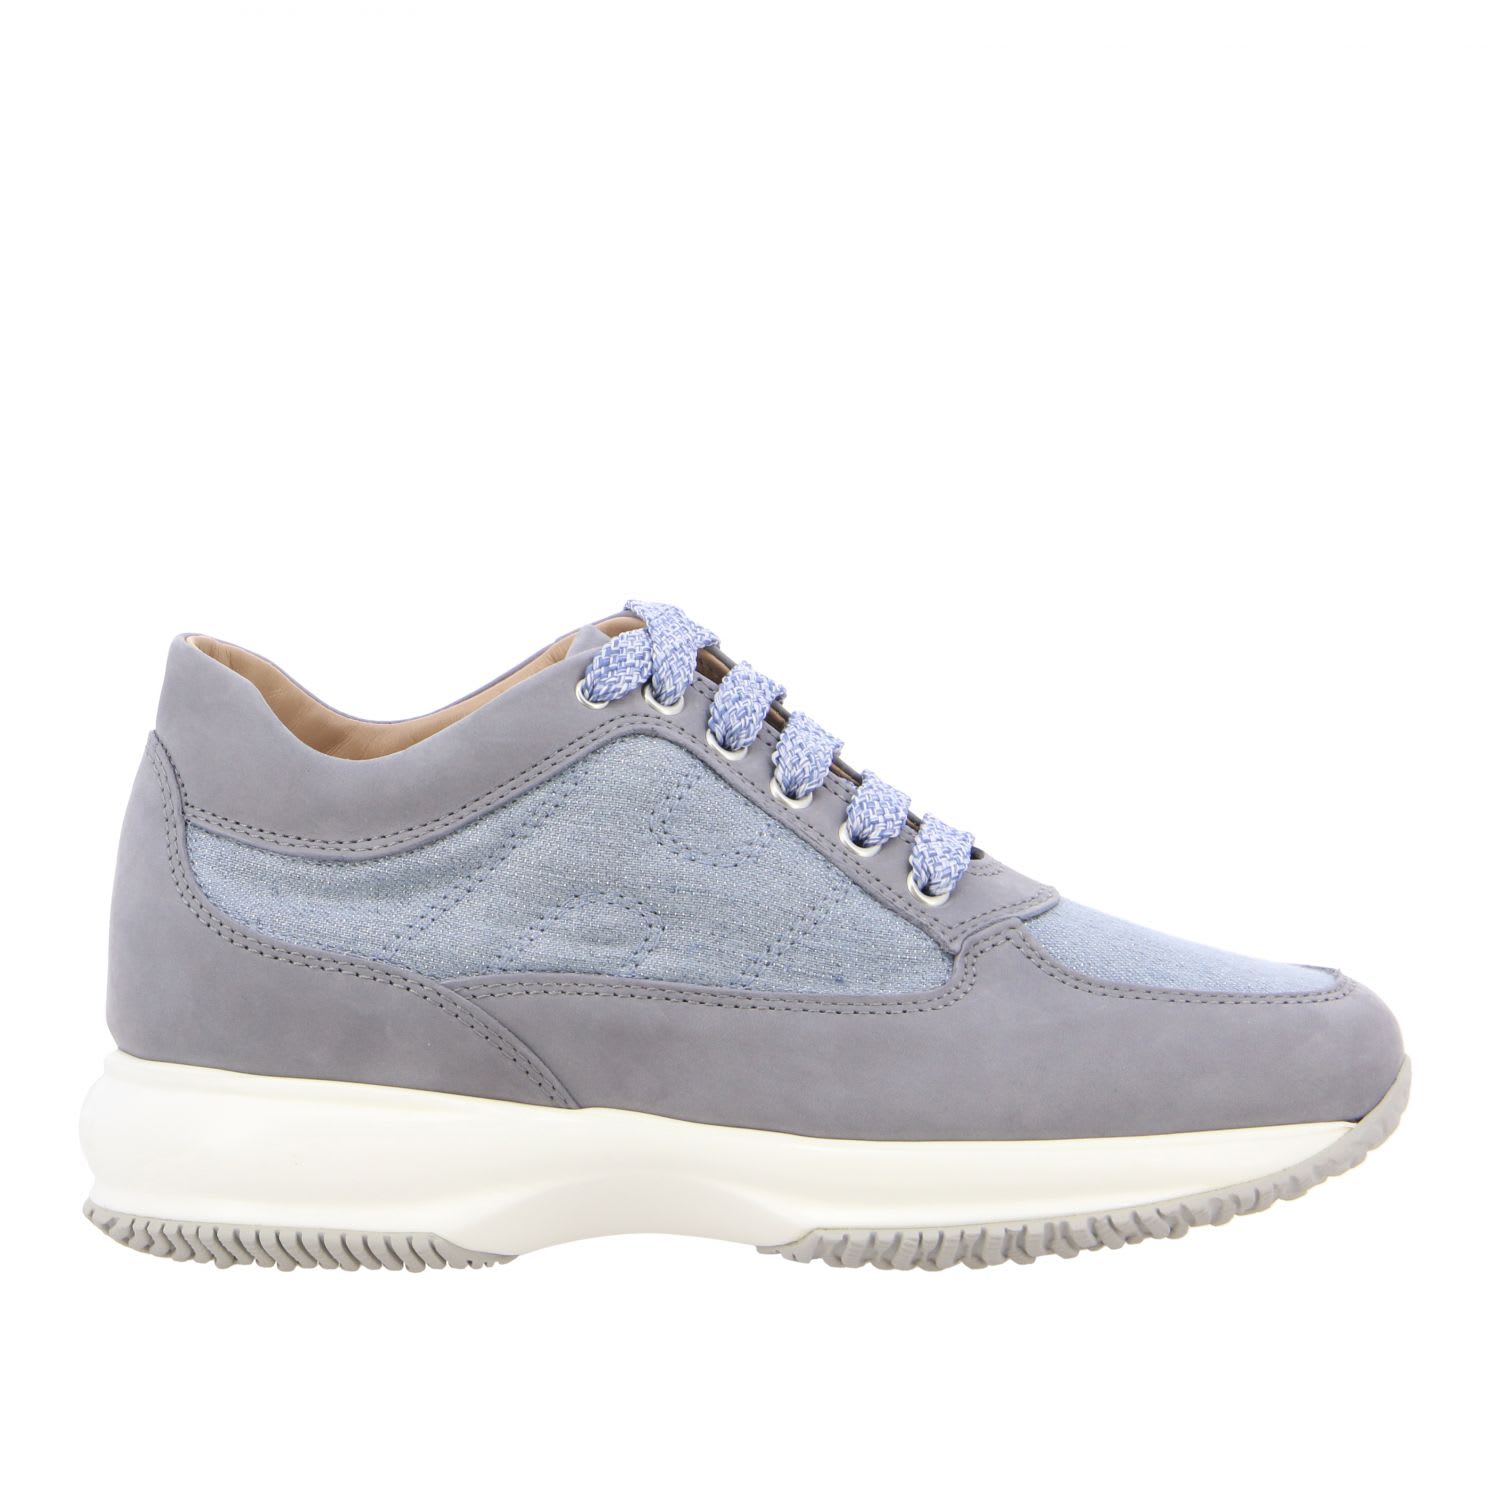 Hogan Sneakers In Suede And Lurex Mesh With Rounded H In Gnawed Blue